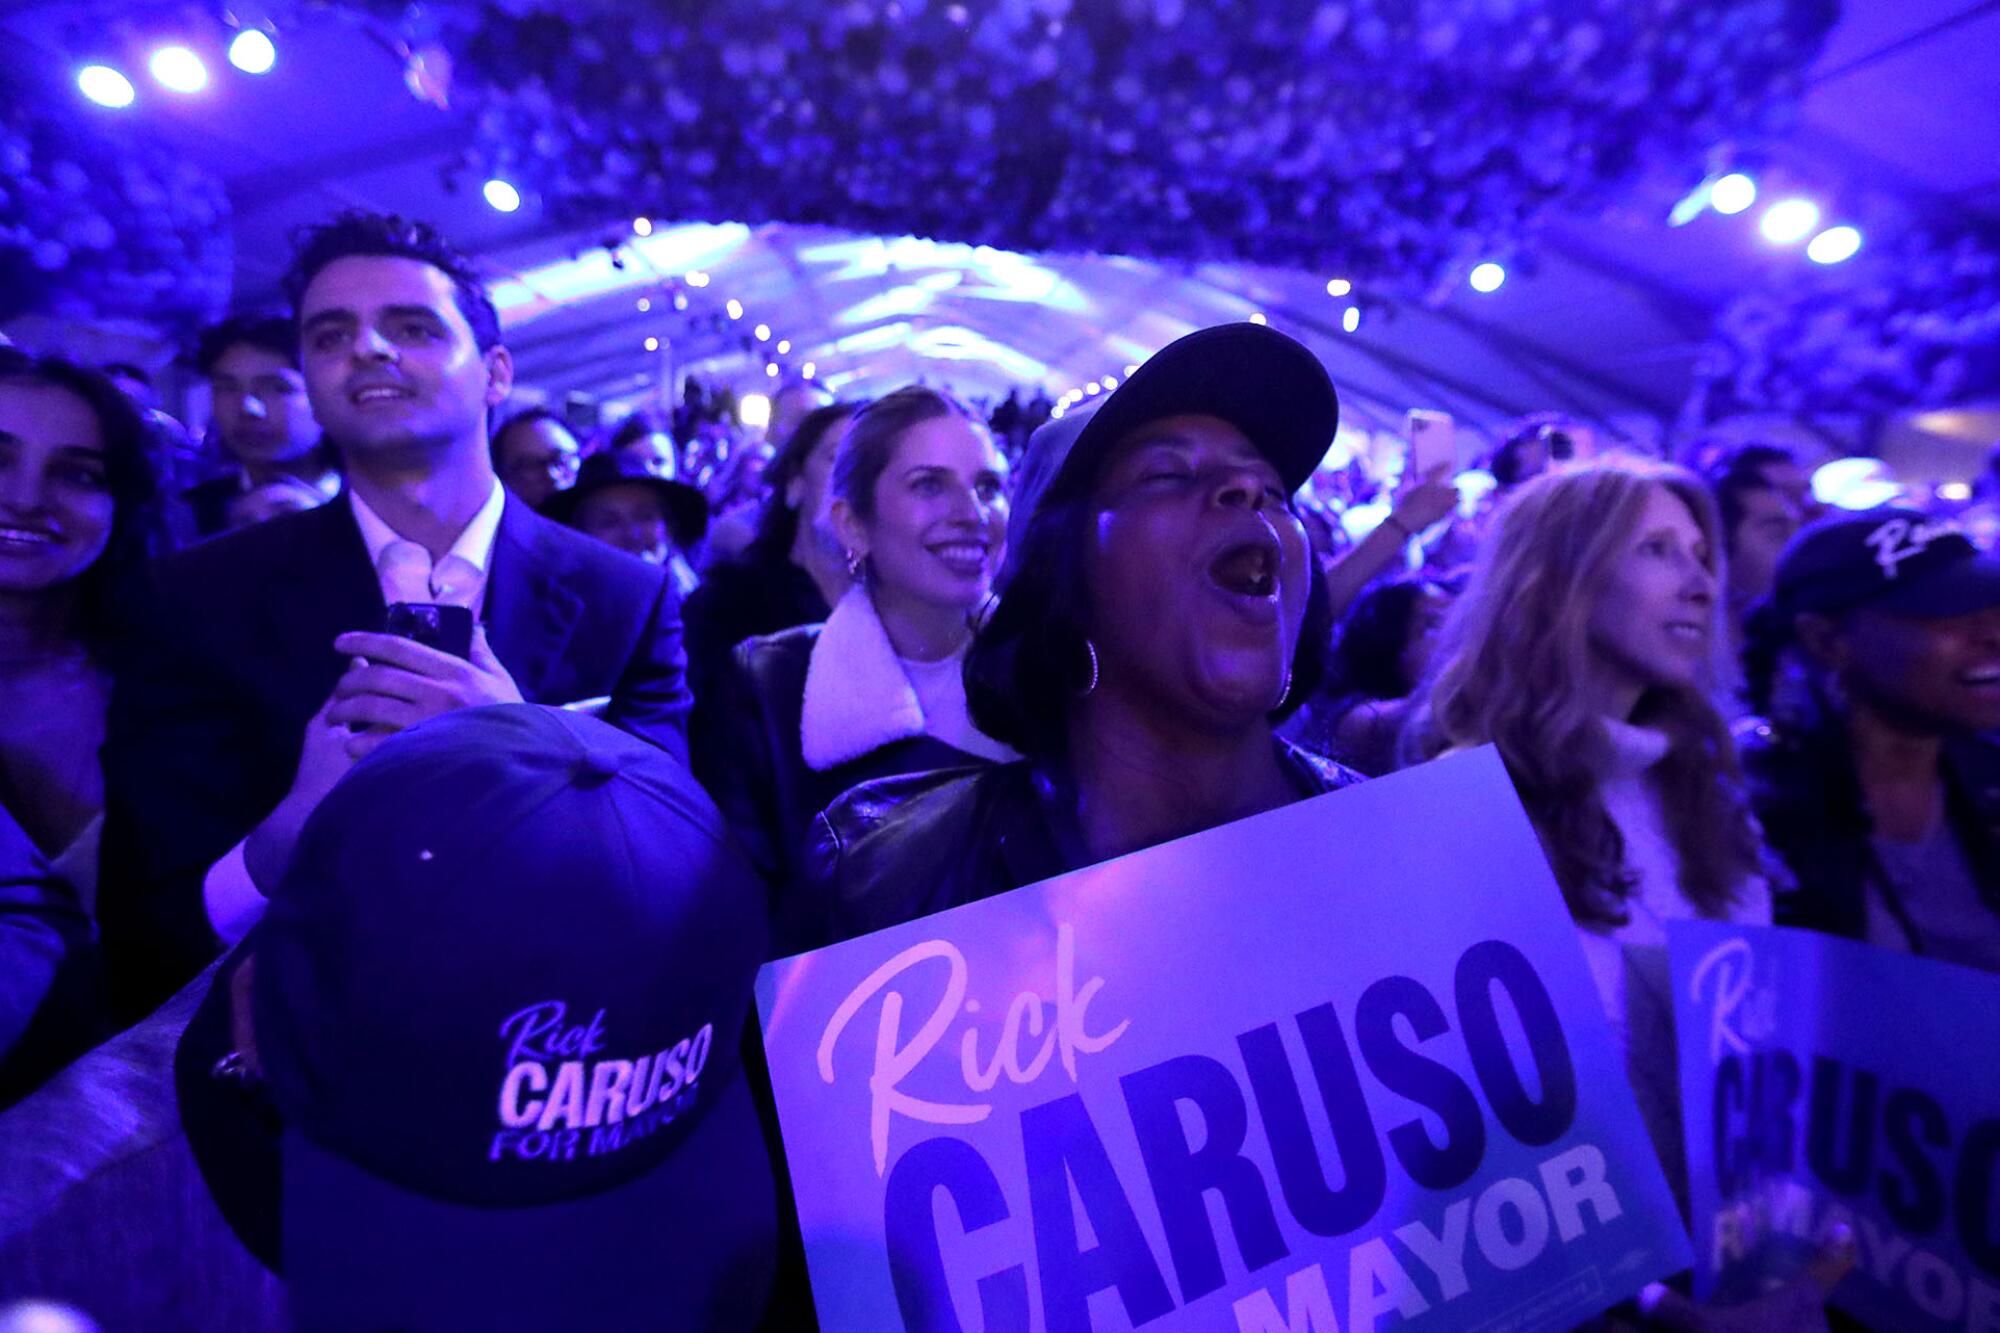 Supporters cheer and hold "Rick Caruso for Mayor" signs.